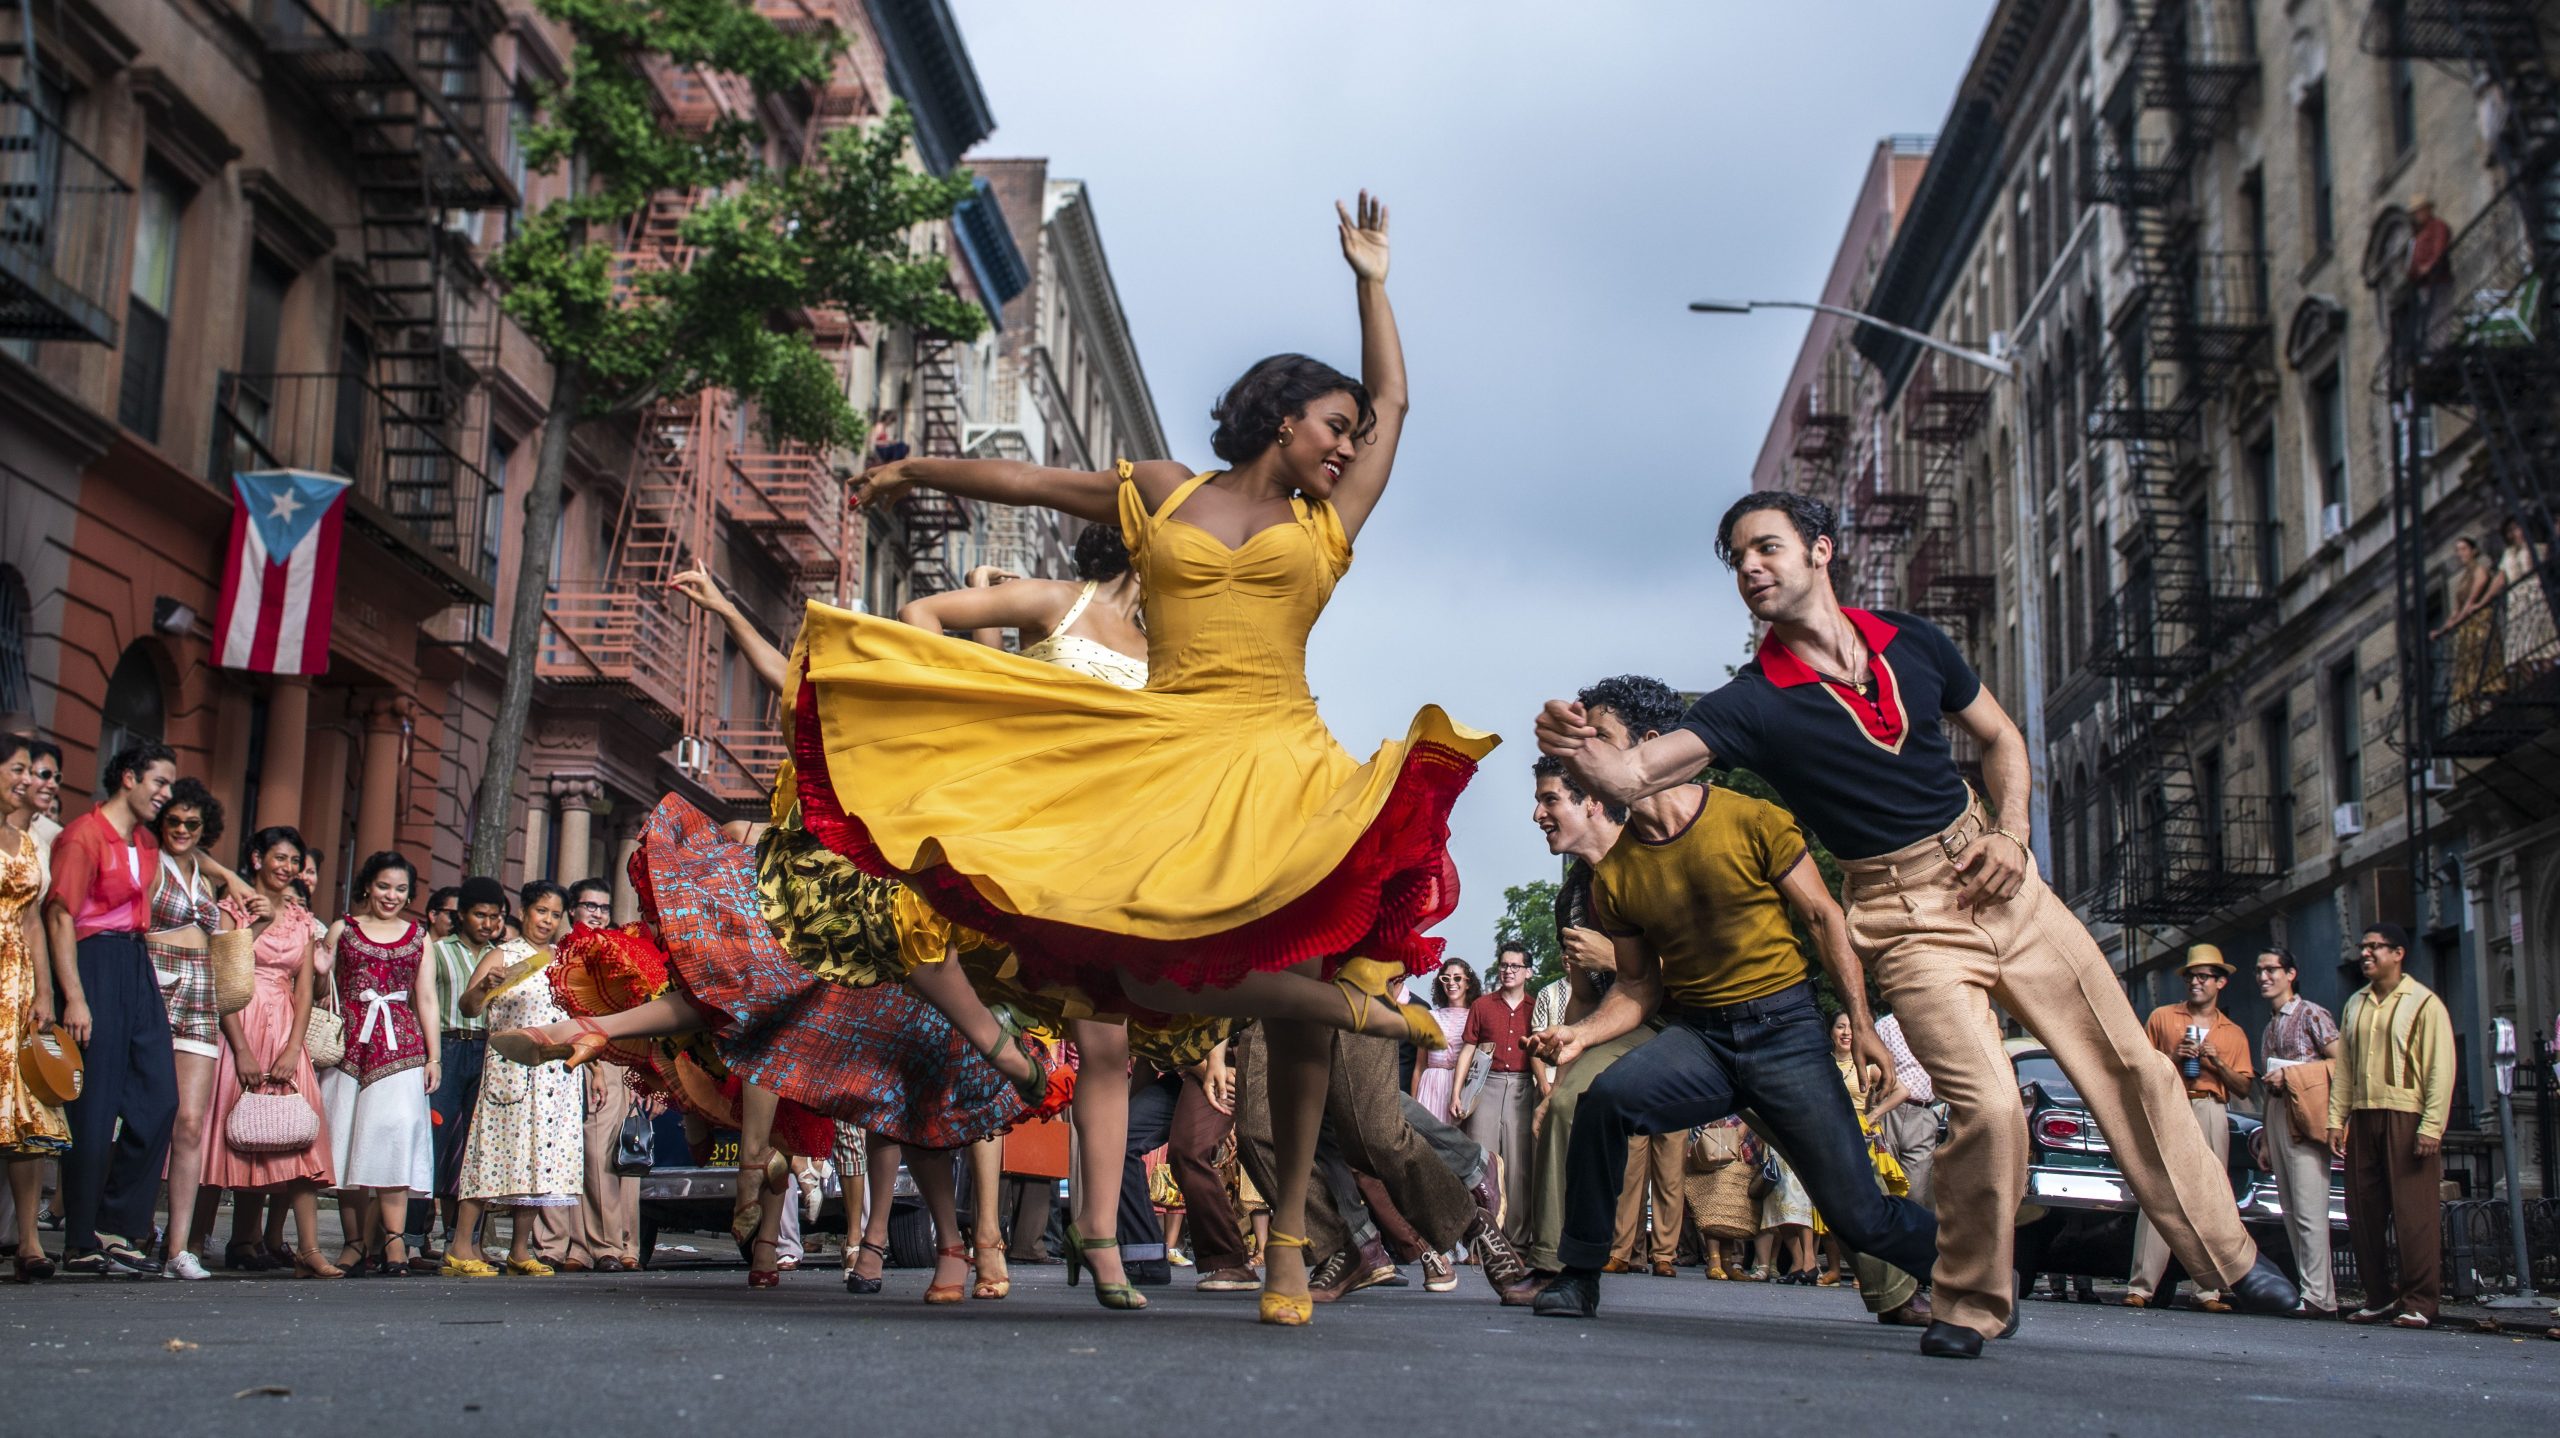 Ariana DeBose as Anita and David Alvarez as Bernardo dance in the middle of a lively crowd in the daytime New York streets in WEST SIDE STORY directed by Steven Spielberg, which features no subtitles for scenes in Spanish.